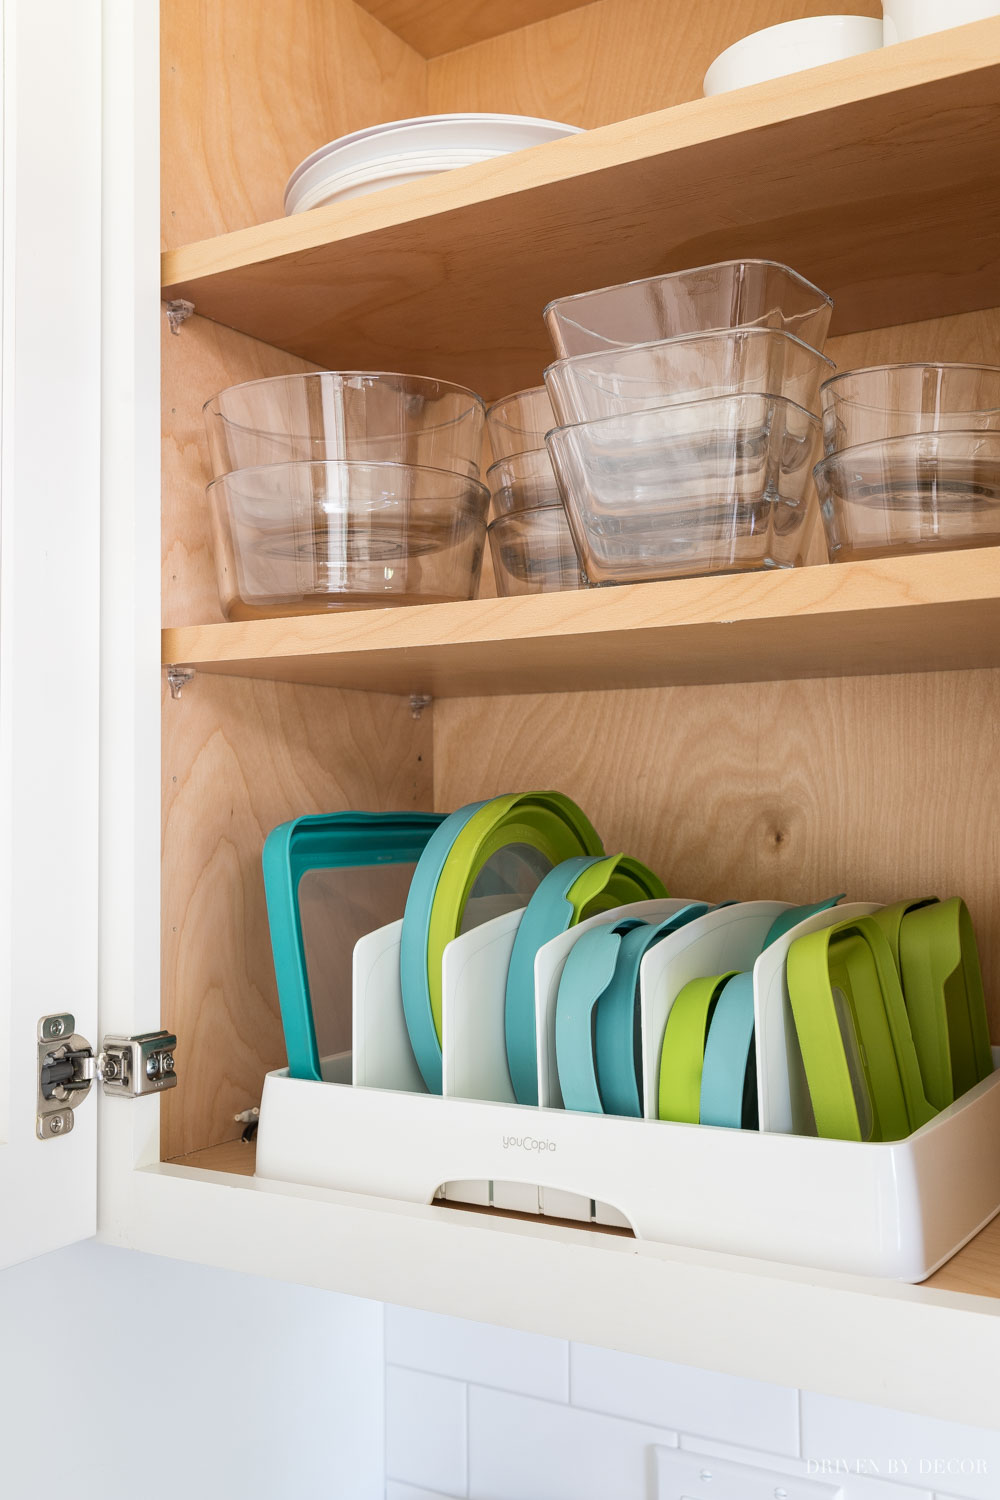 How To Organize Your Kitchen Drawers: 20 Ideas To Tame The Clutter